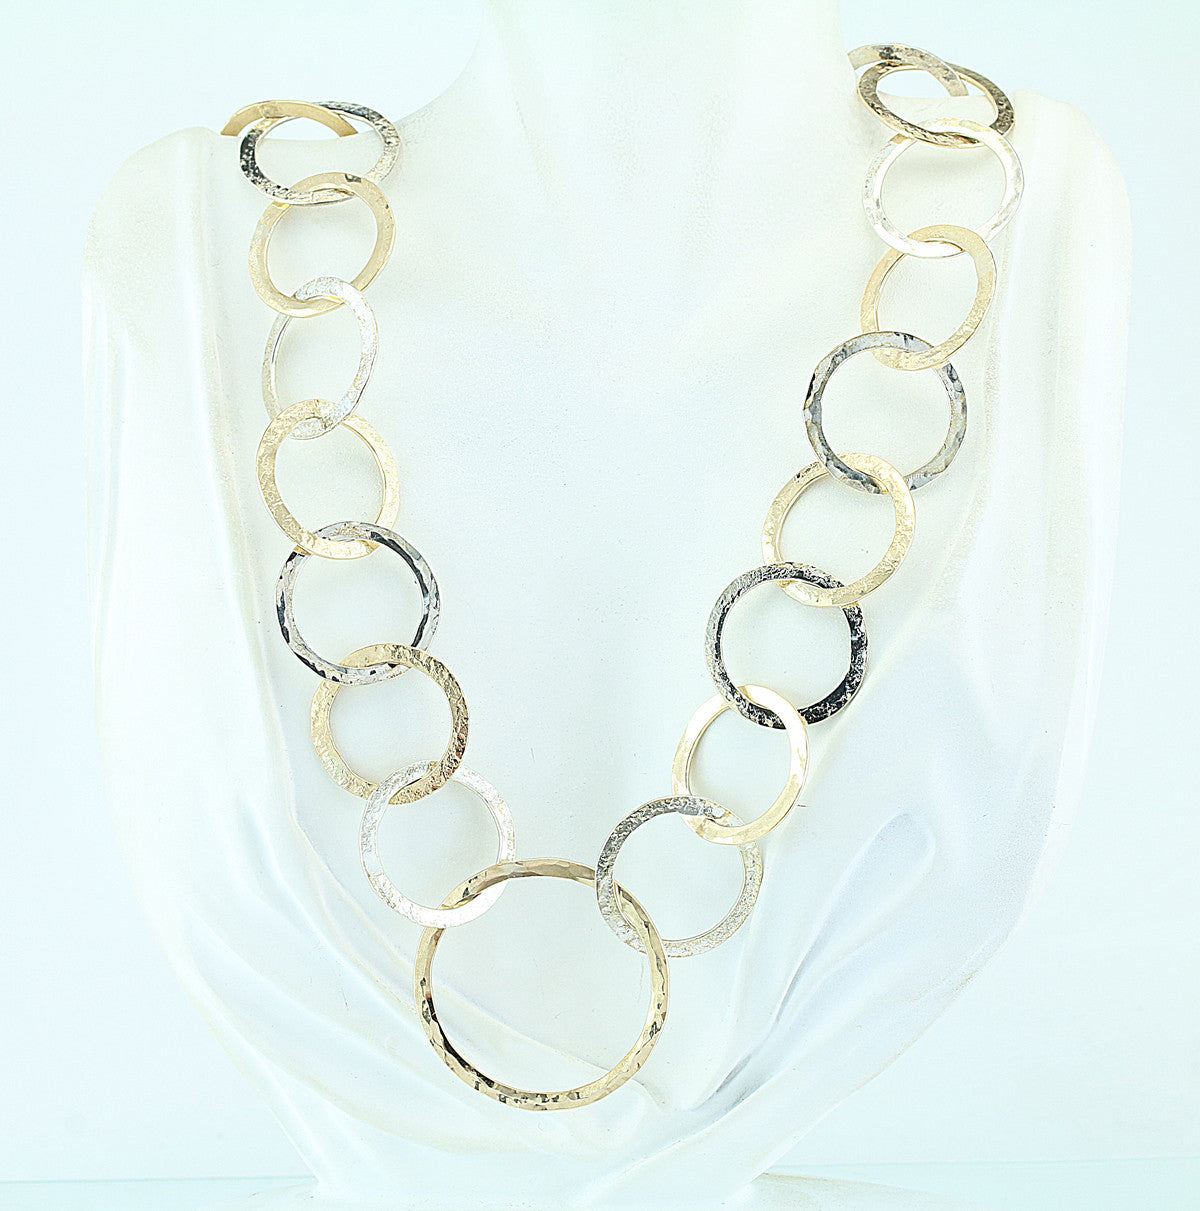 Hand Forged and Hammered Sterling and Gold Filled Circles Necklace 22"